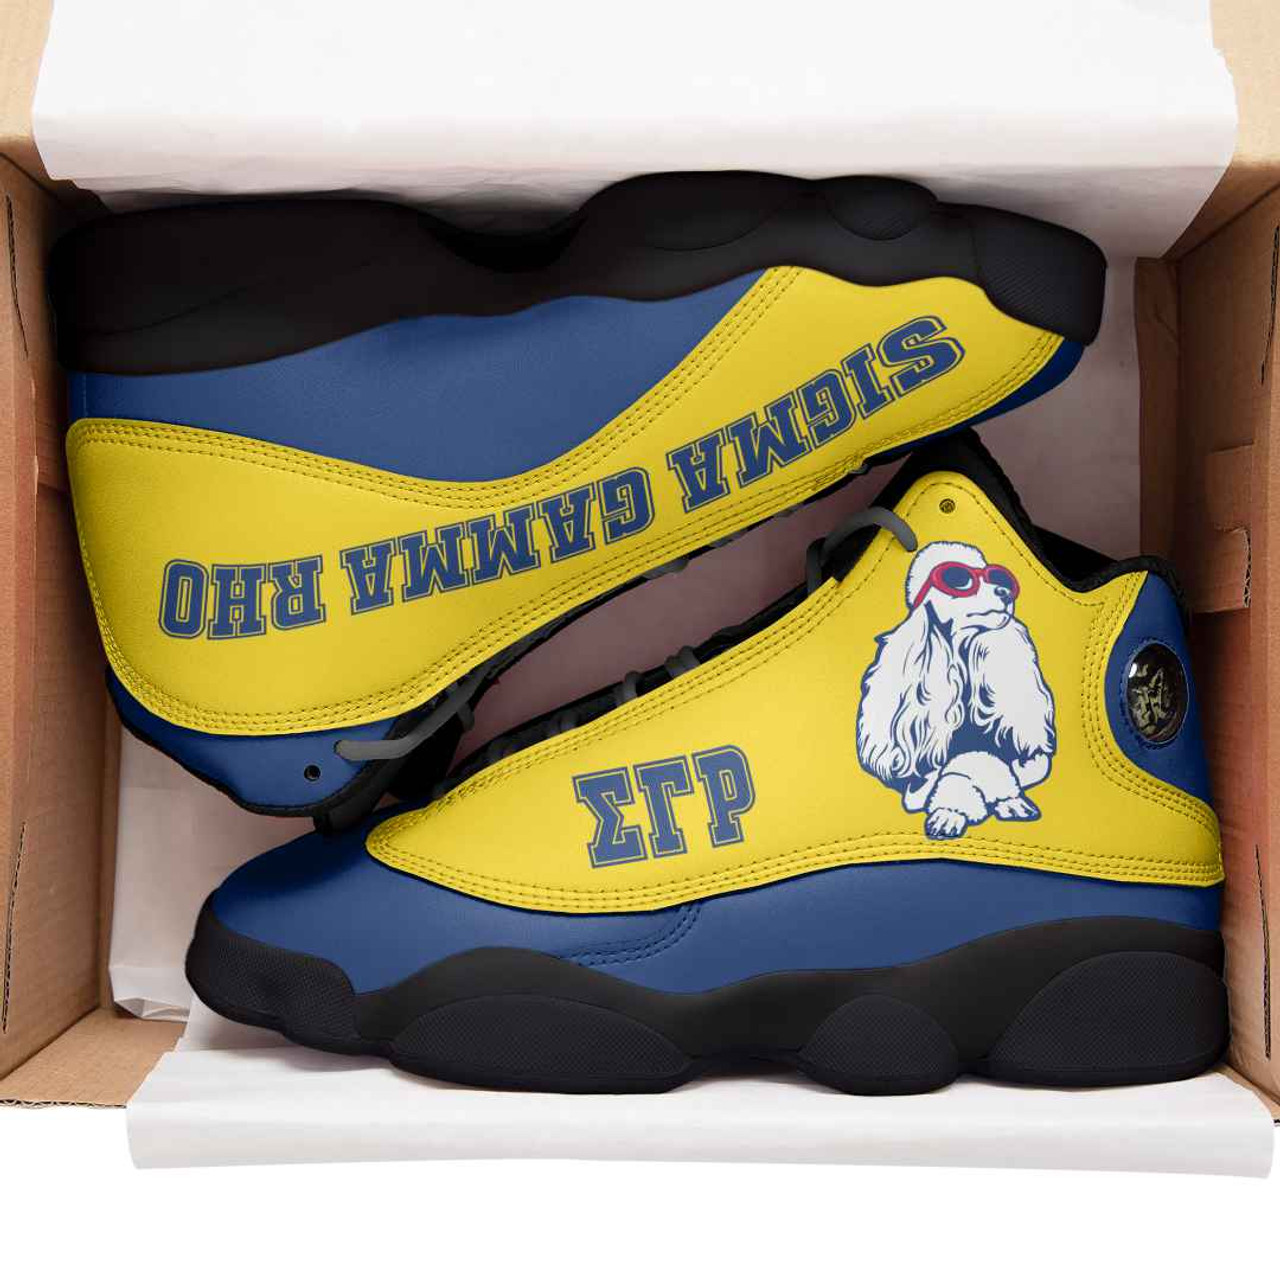 Sigma Gamma Rho High Top Basketball Shoes J 13 - Sorority Poodle With Hand Gesture High Top Sneakers J 13